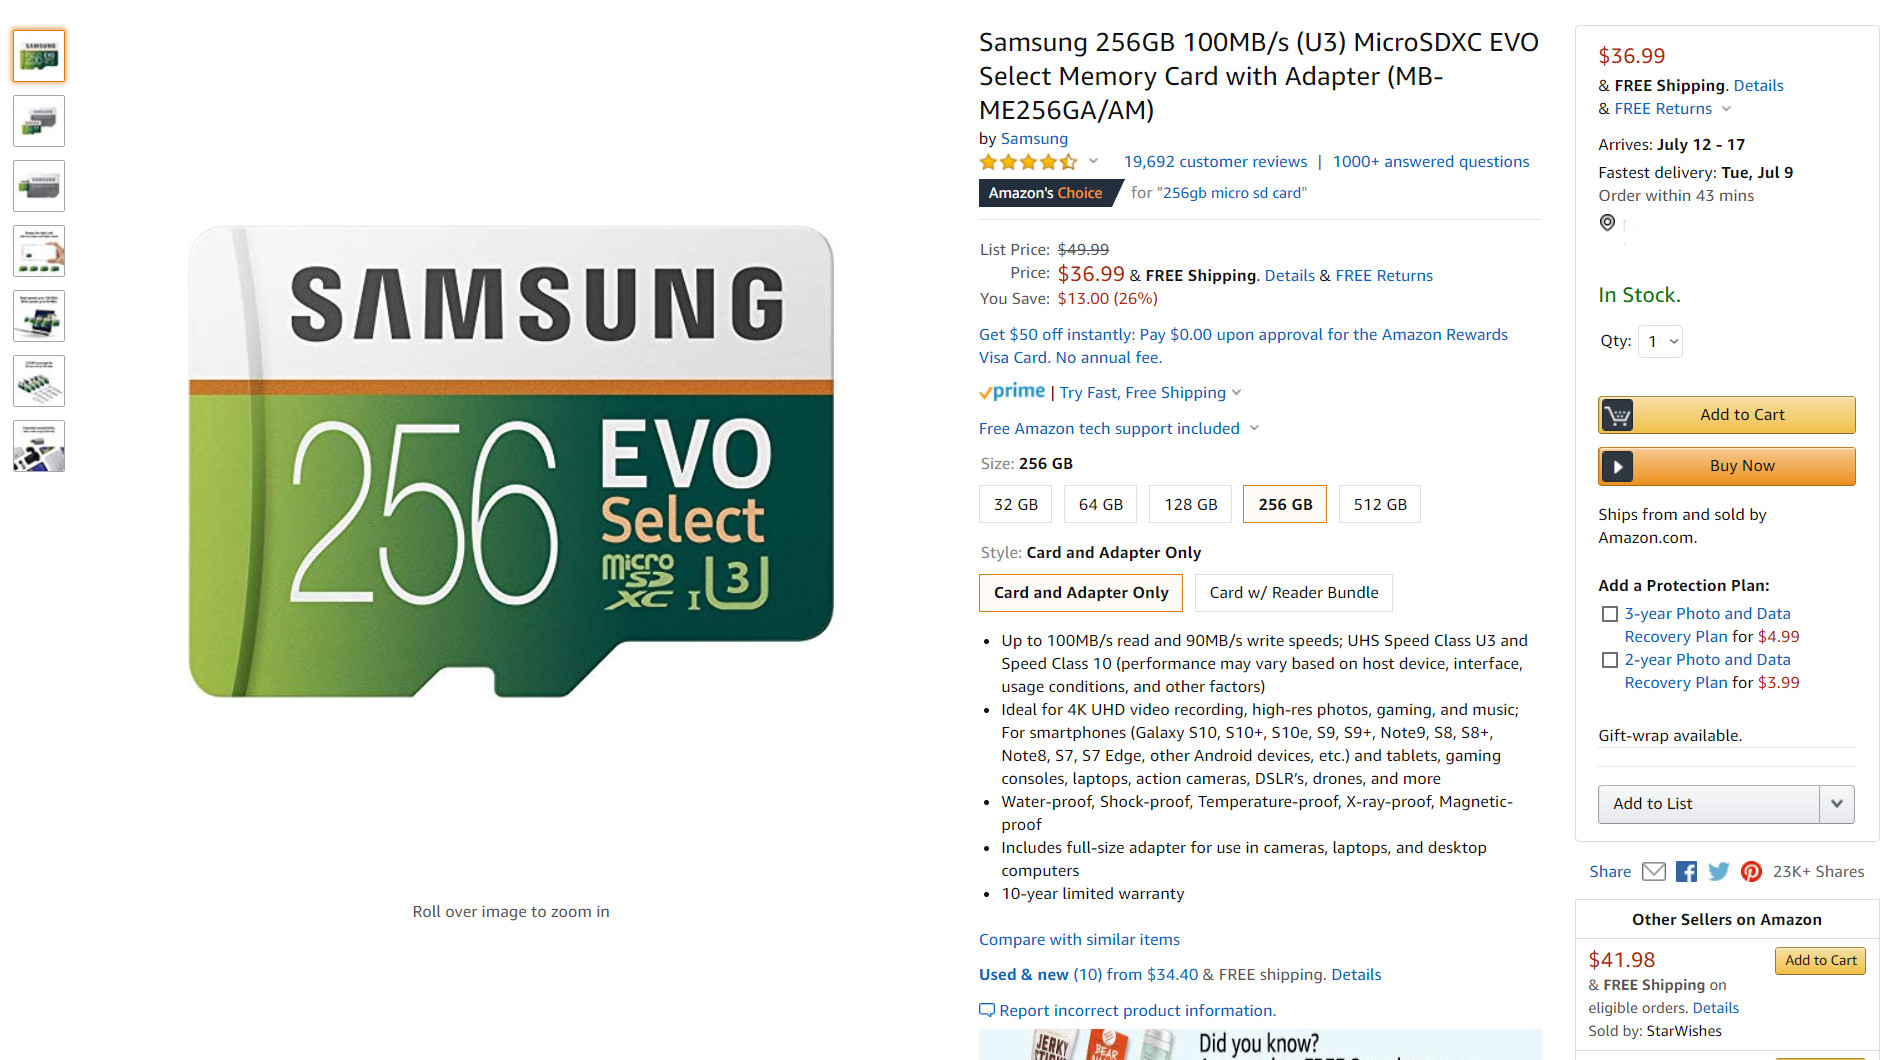 The Samsung 256GB microSD card is available at a new low price.